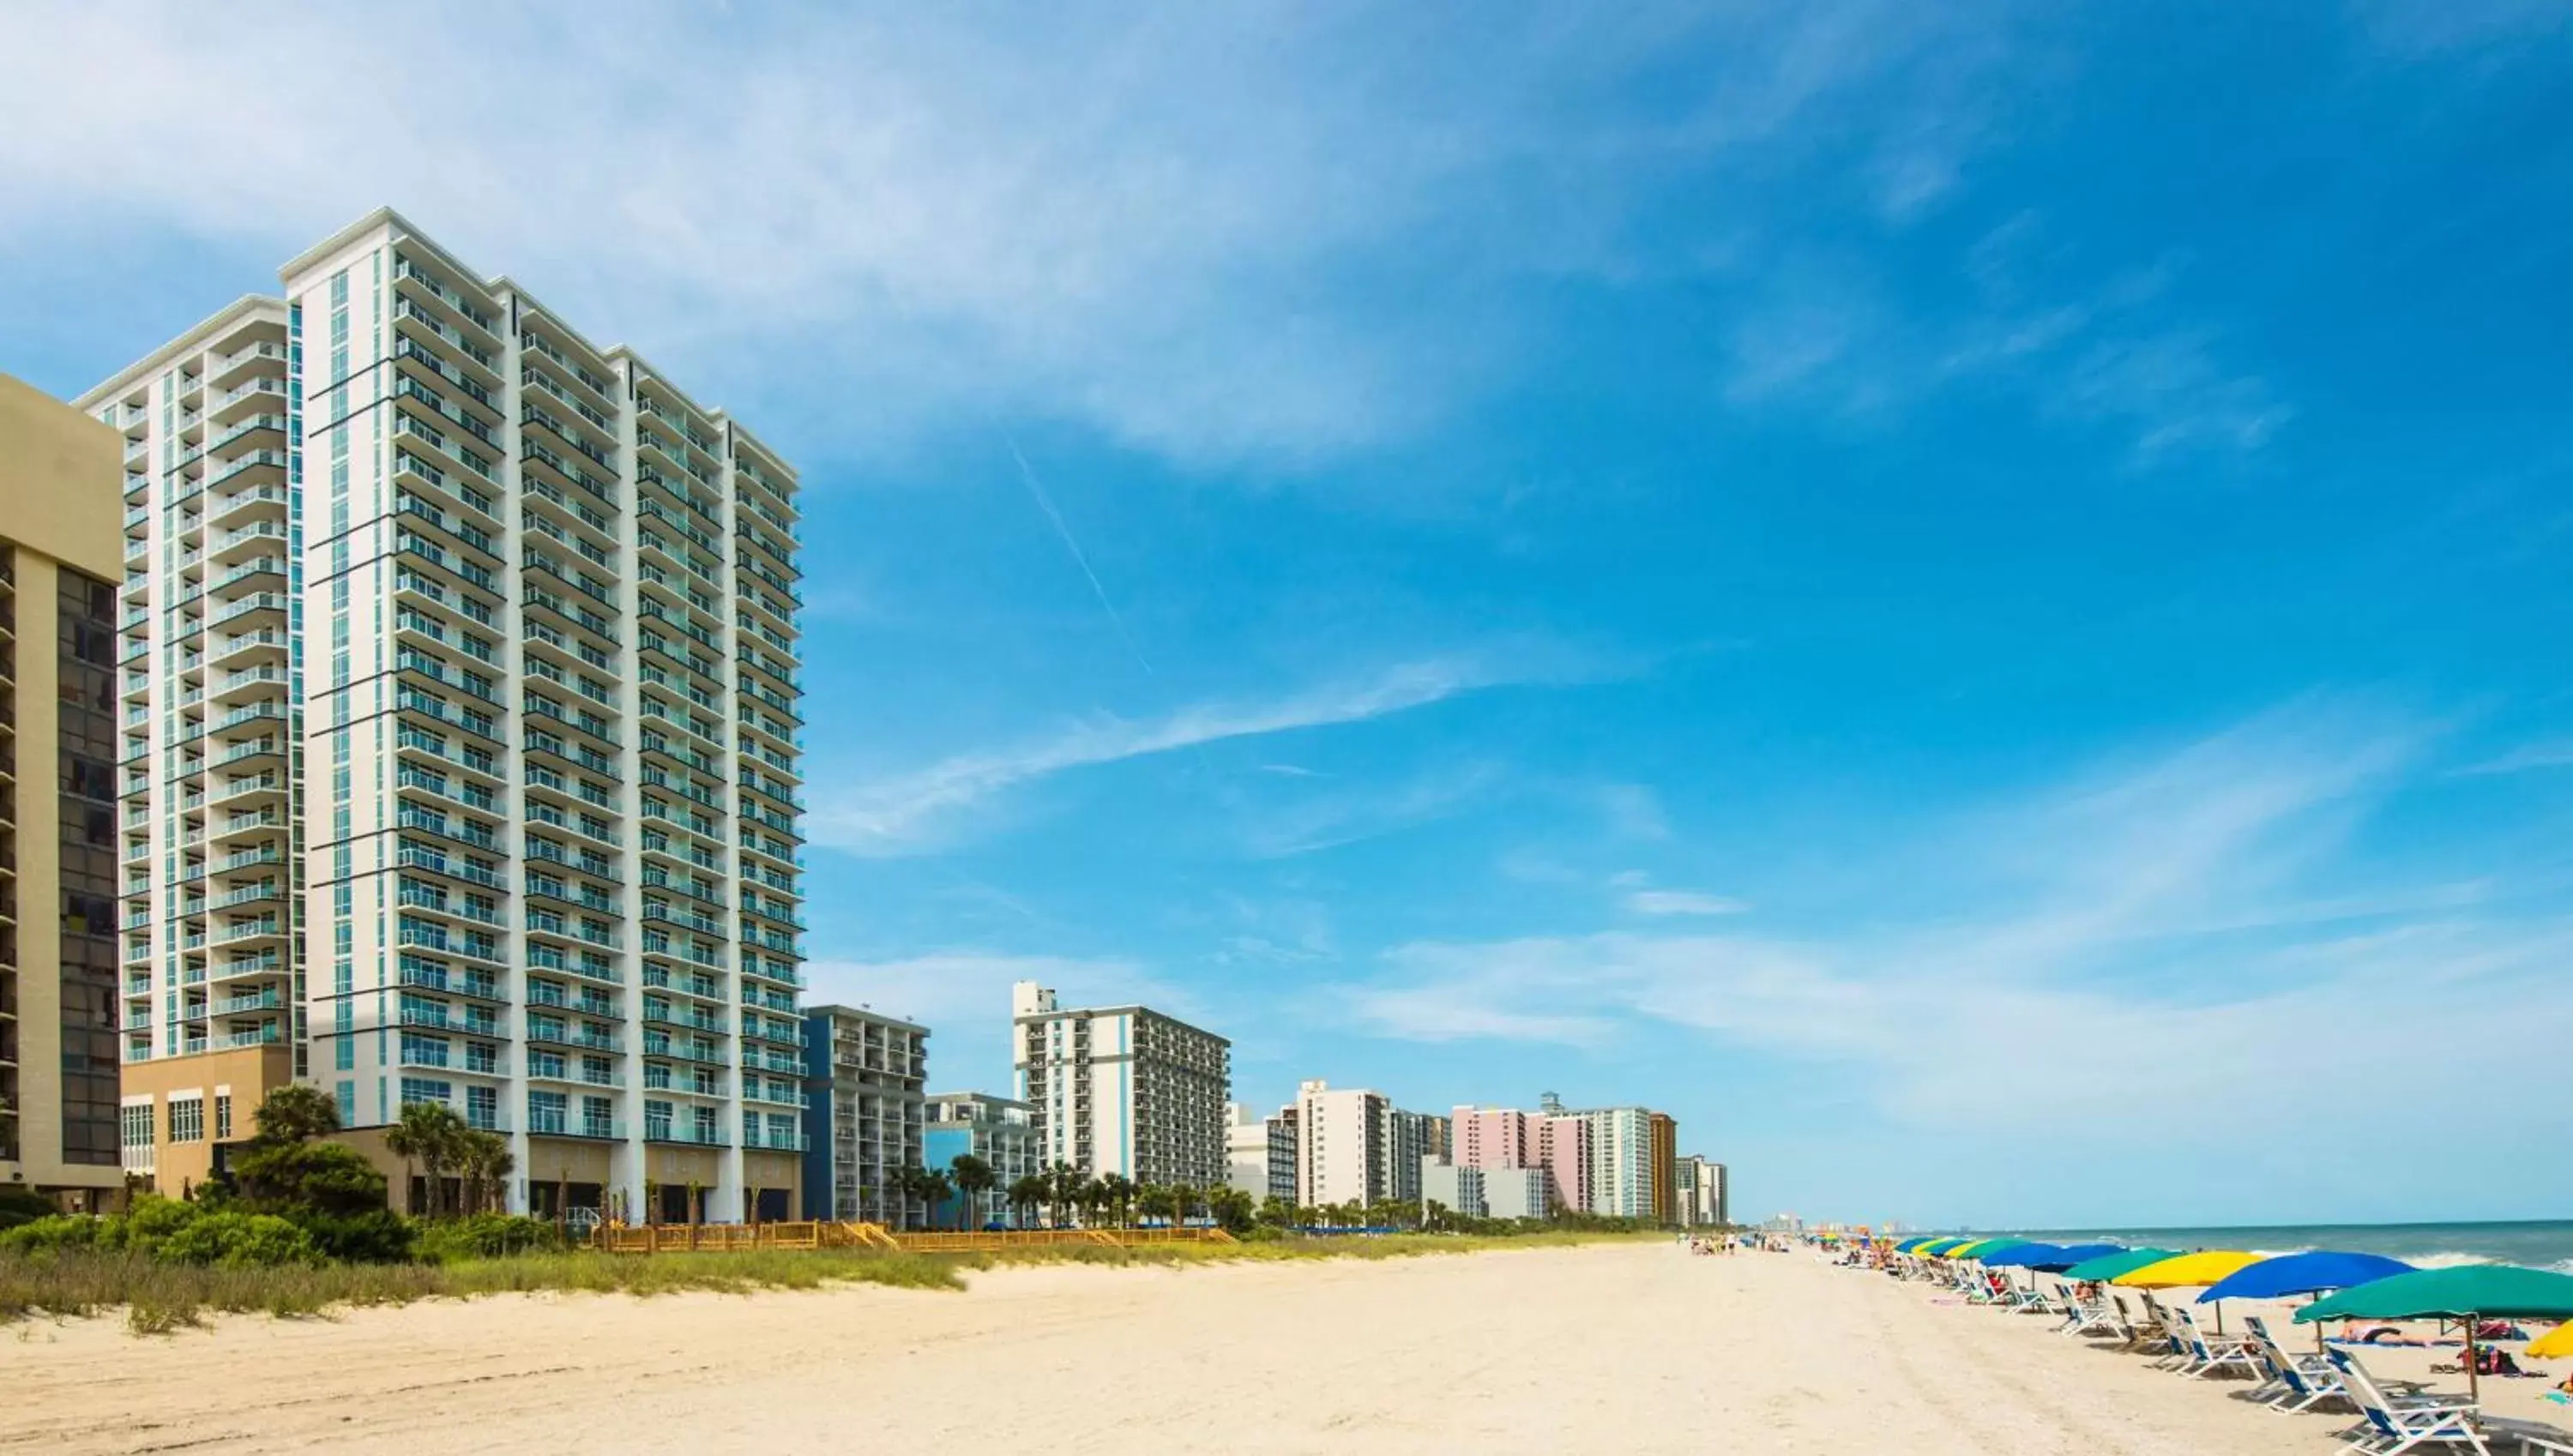 Property building in Hilton Grand Vacations Club Ocean 22 Myrtle Beach